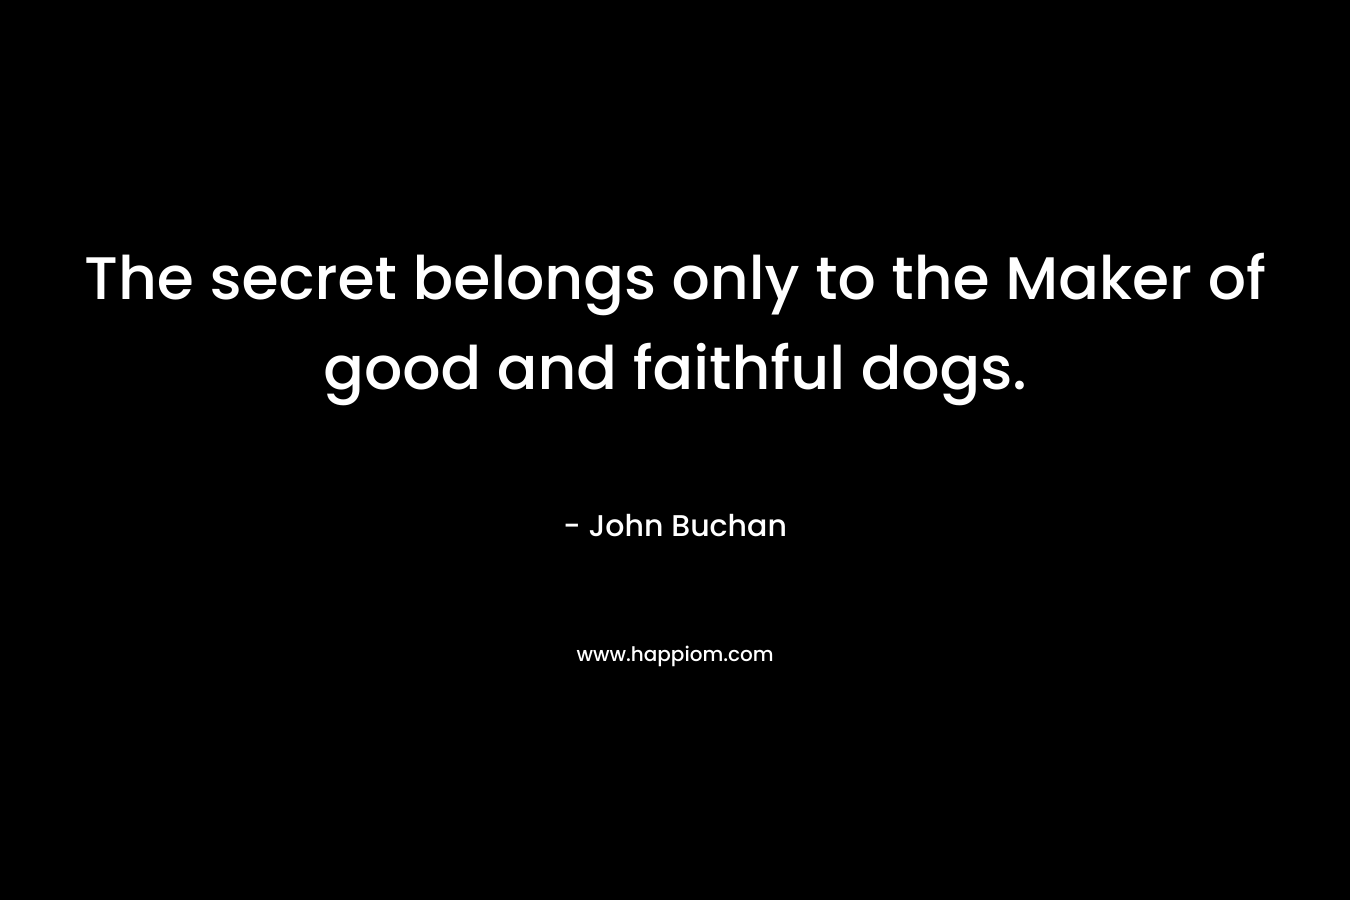 The secret belongs only to the Maker of good and faithful dogs. – John Buchan